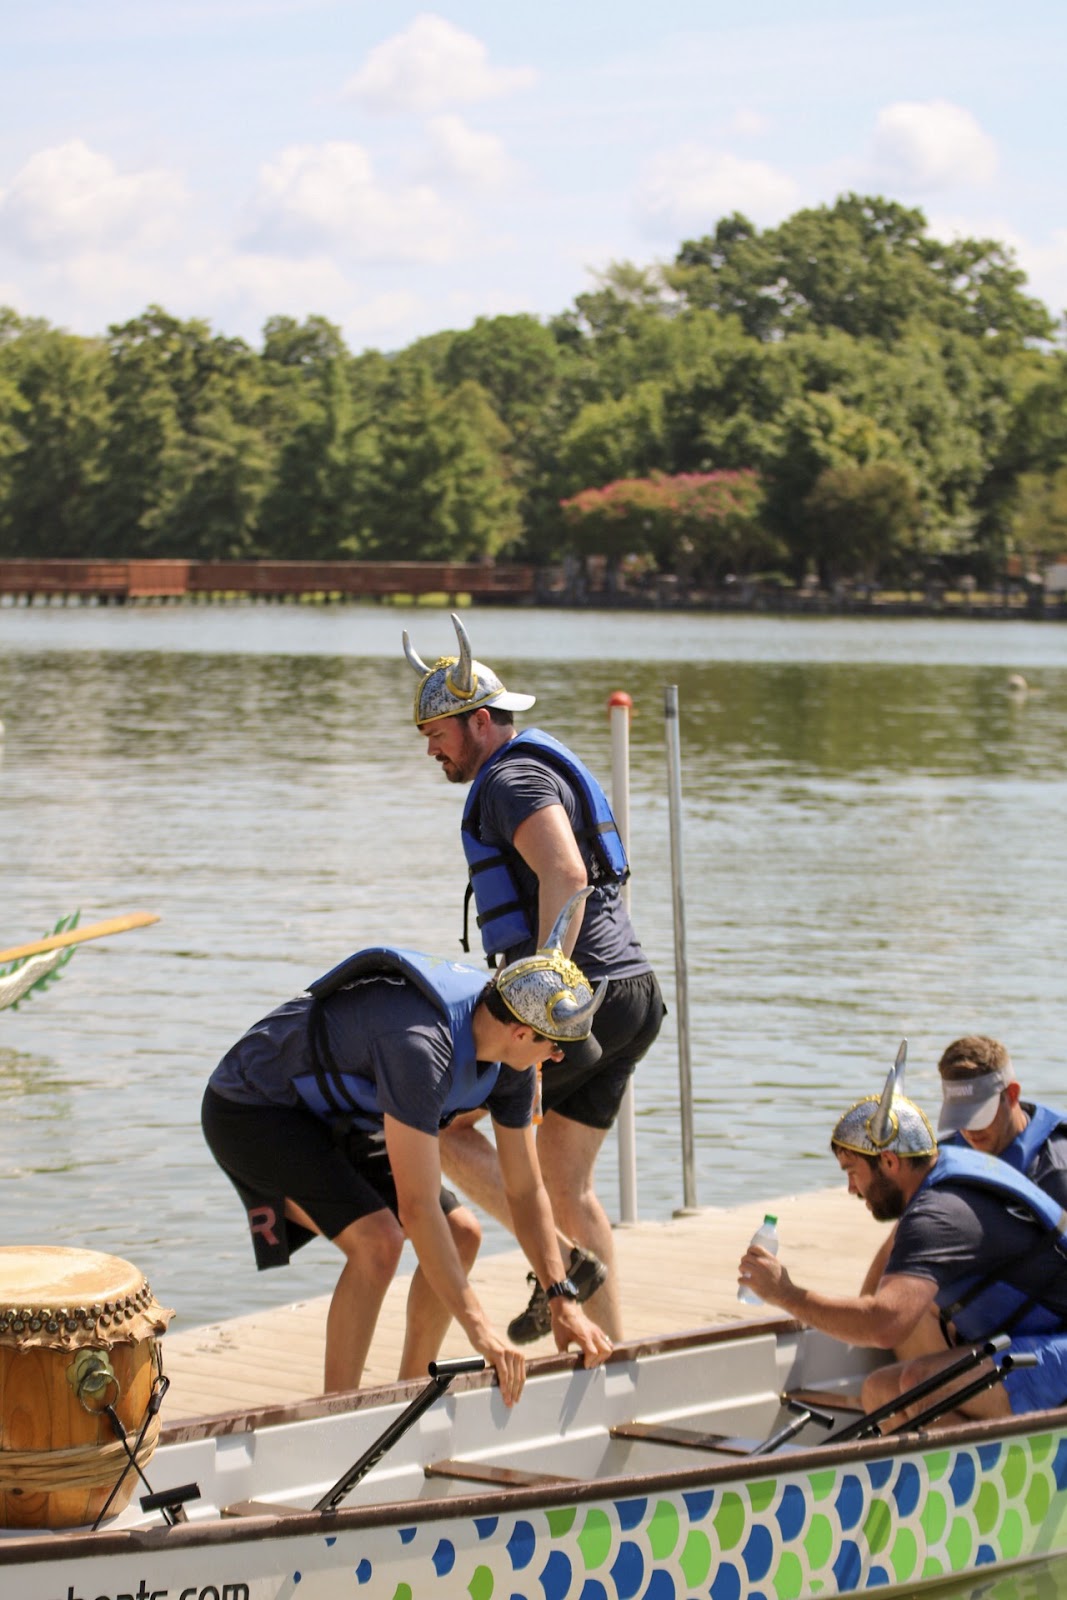 FK5u Recap: here’s what you missed during Birmingham’s first Dragon Boat Race and Festival at East Lake Park ﻿